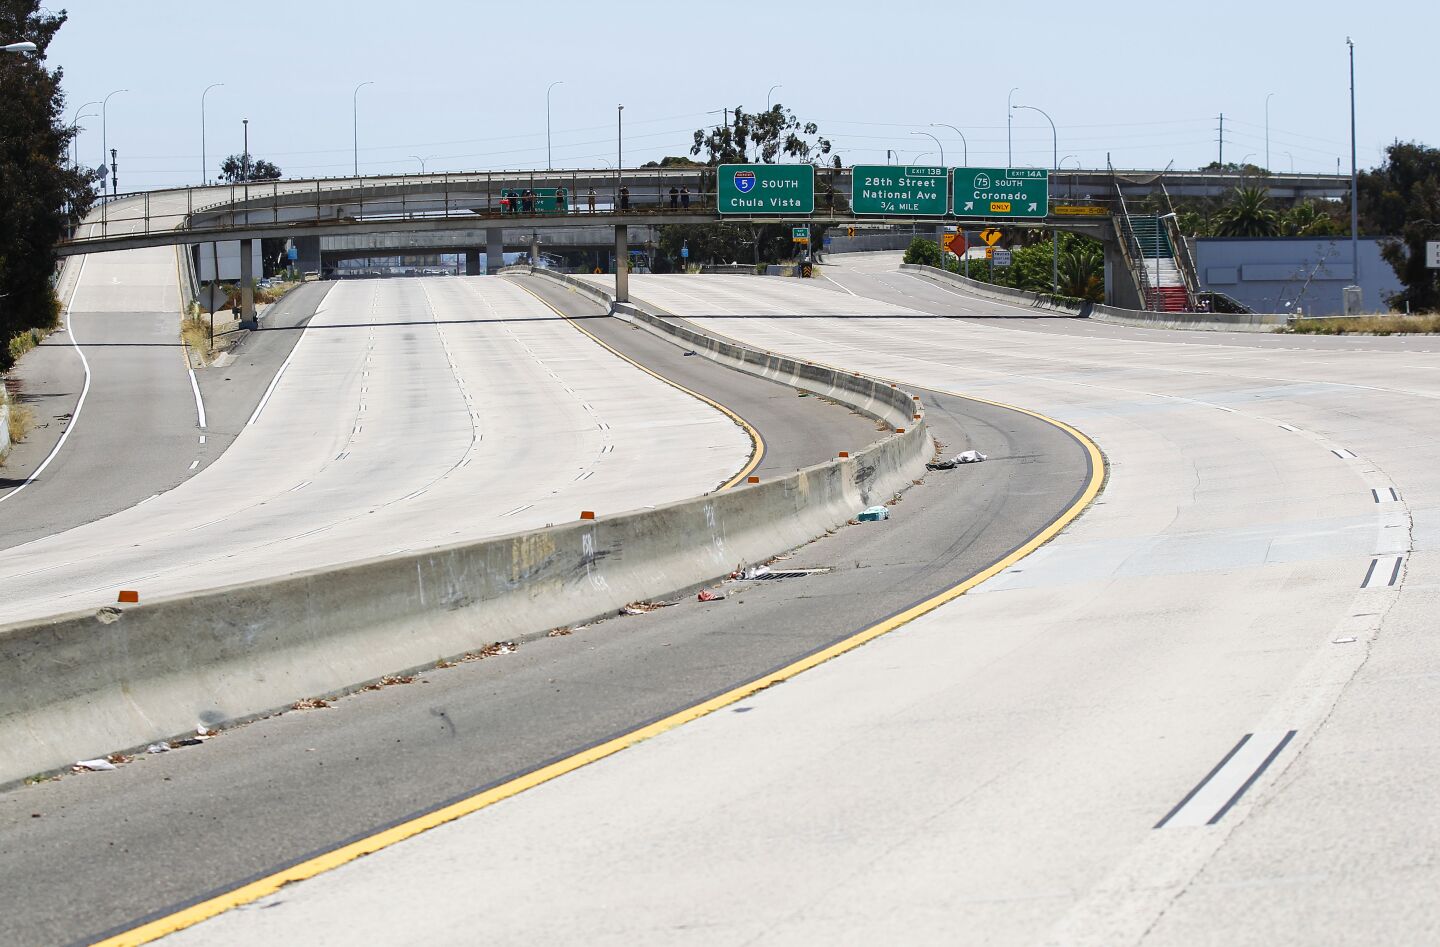 A group was protesting the death of George Floyd forced the I-5 to be shut down in the East Village of San Diego on May 31, 2020.